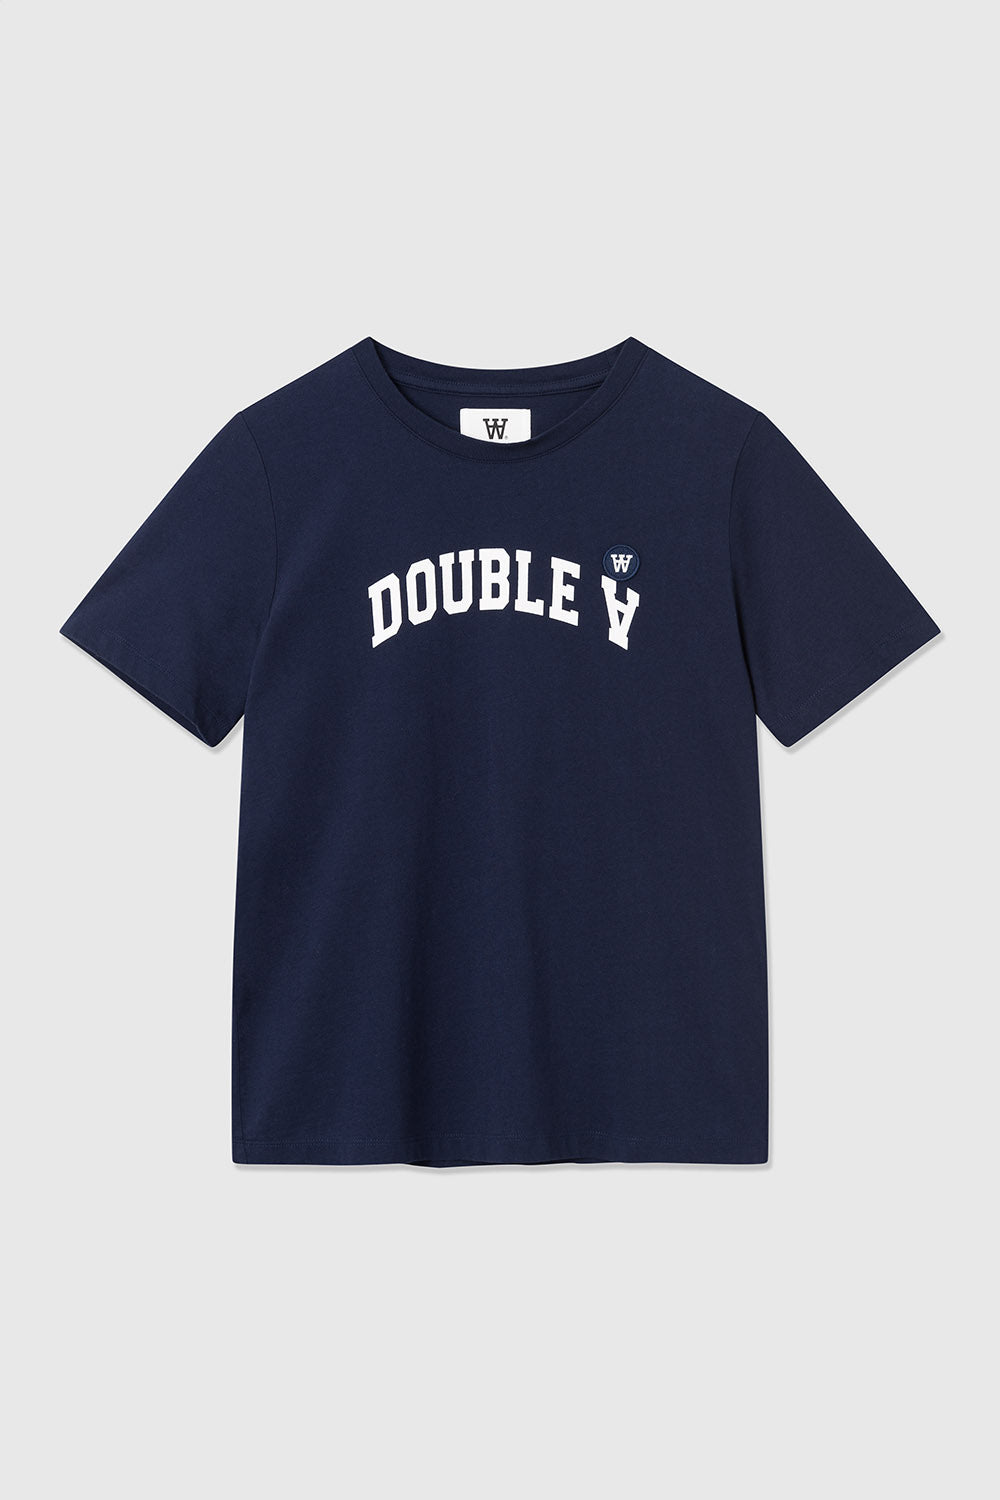 Double A by Wood Wood Mia Arch Script T-shirt Navy ( Women's)